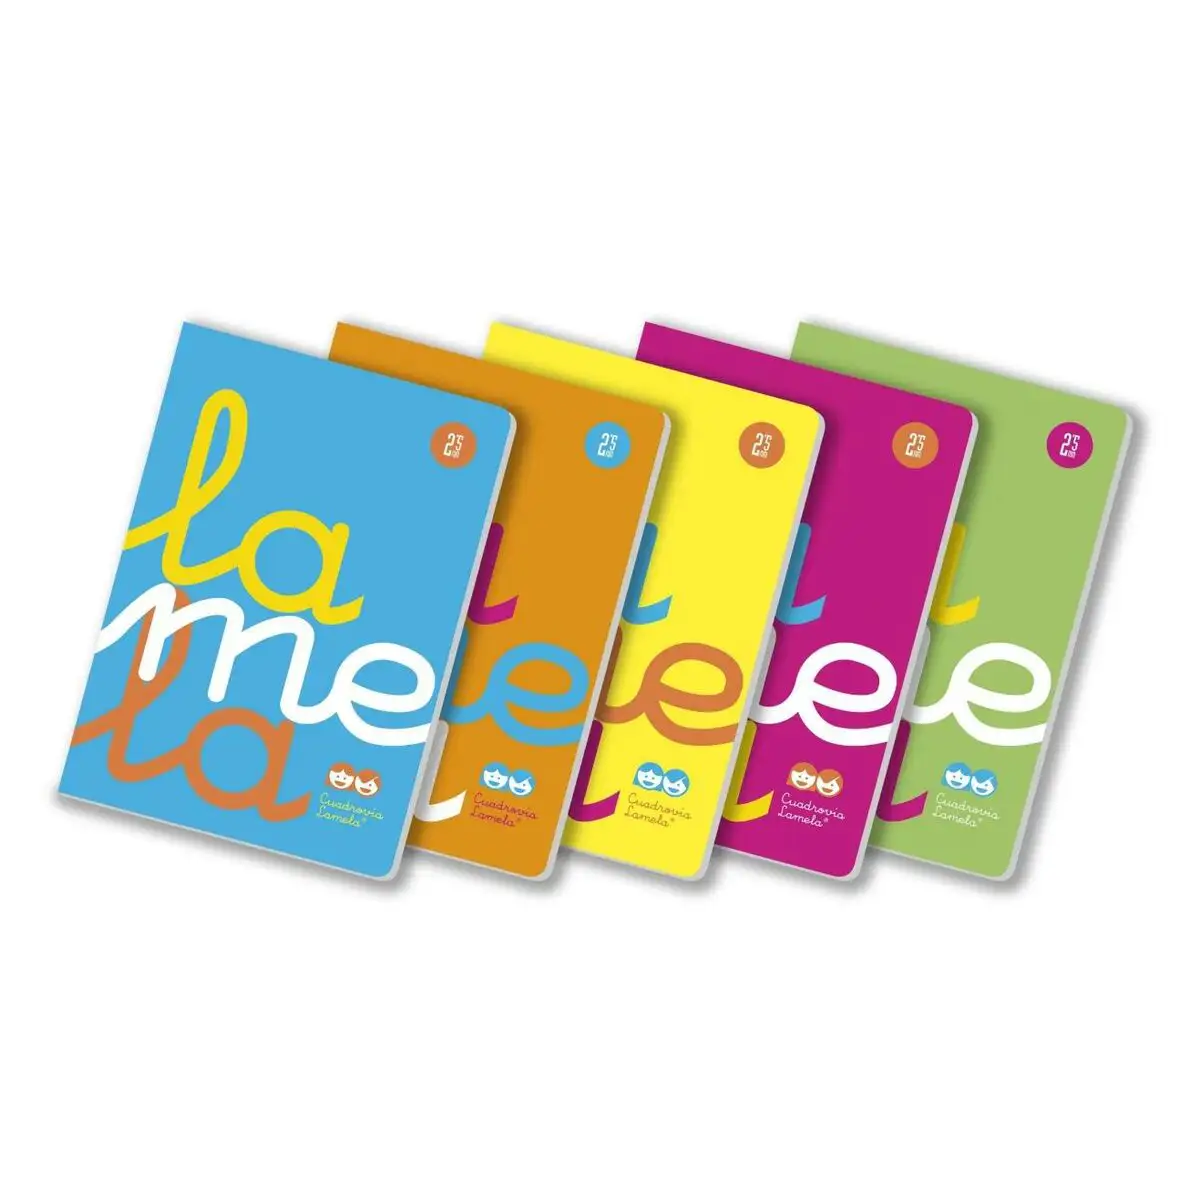 Carnet 5 feuilles OR alimentaire